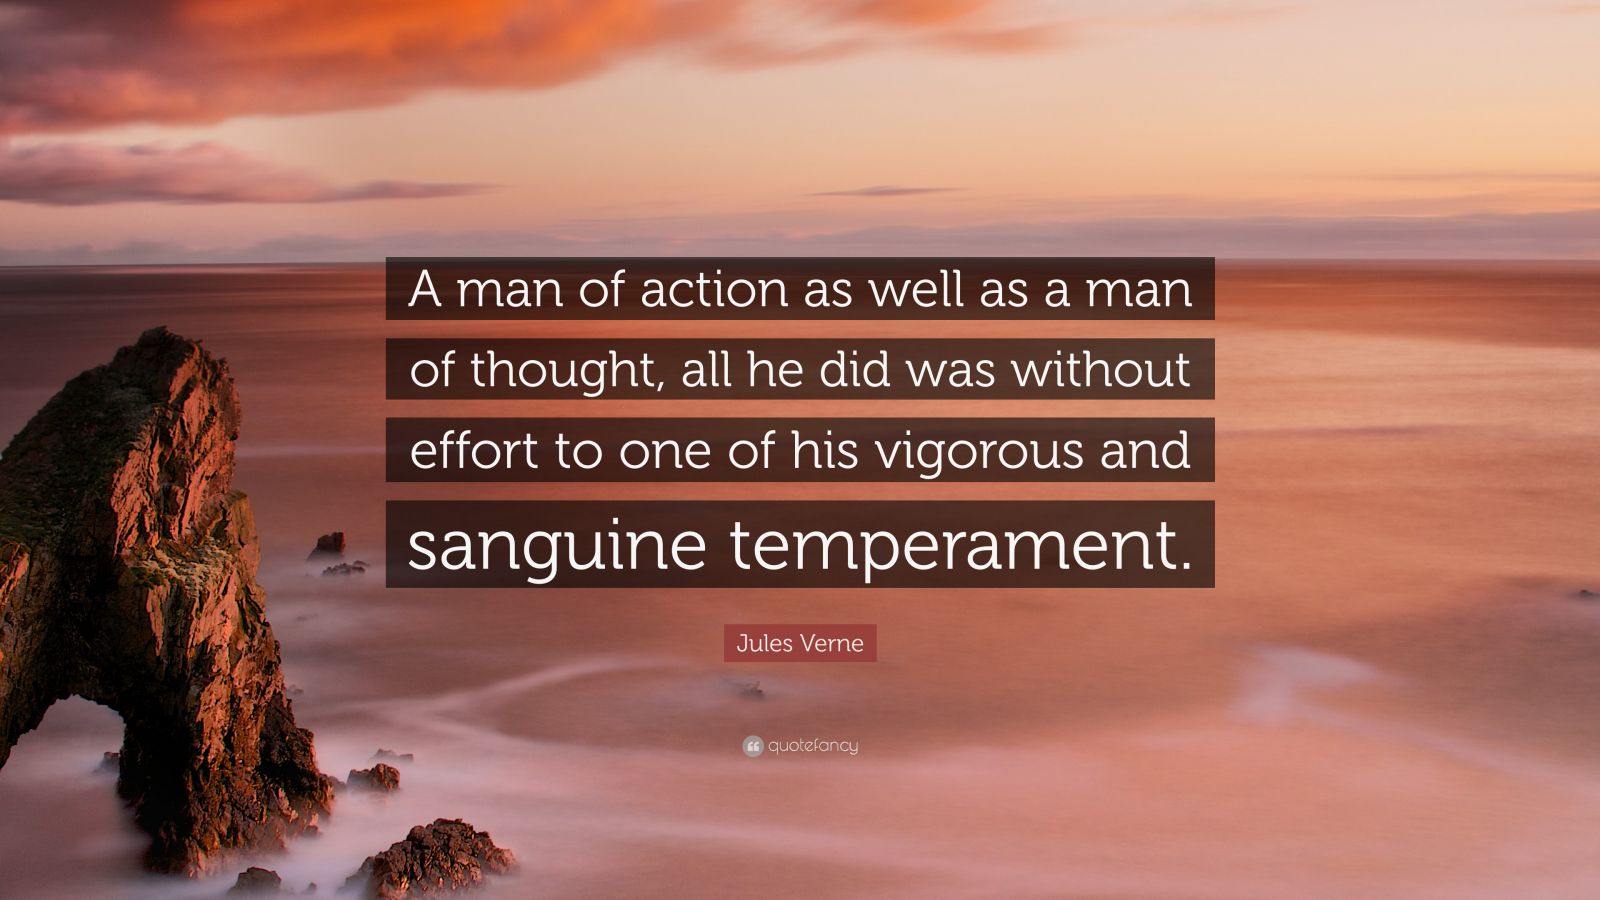 Jules Verne Quote: “A man of action as well as a man of thought, all ...